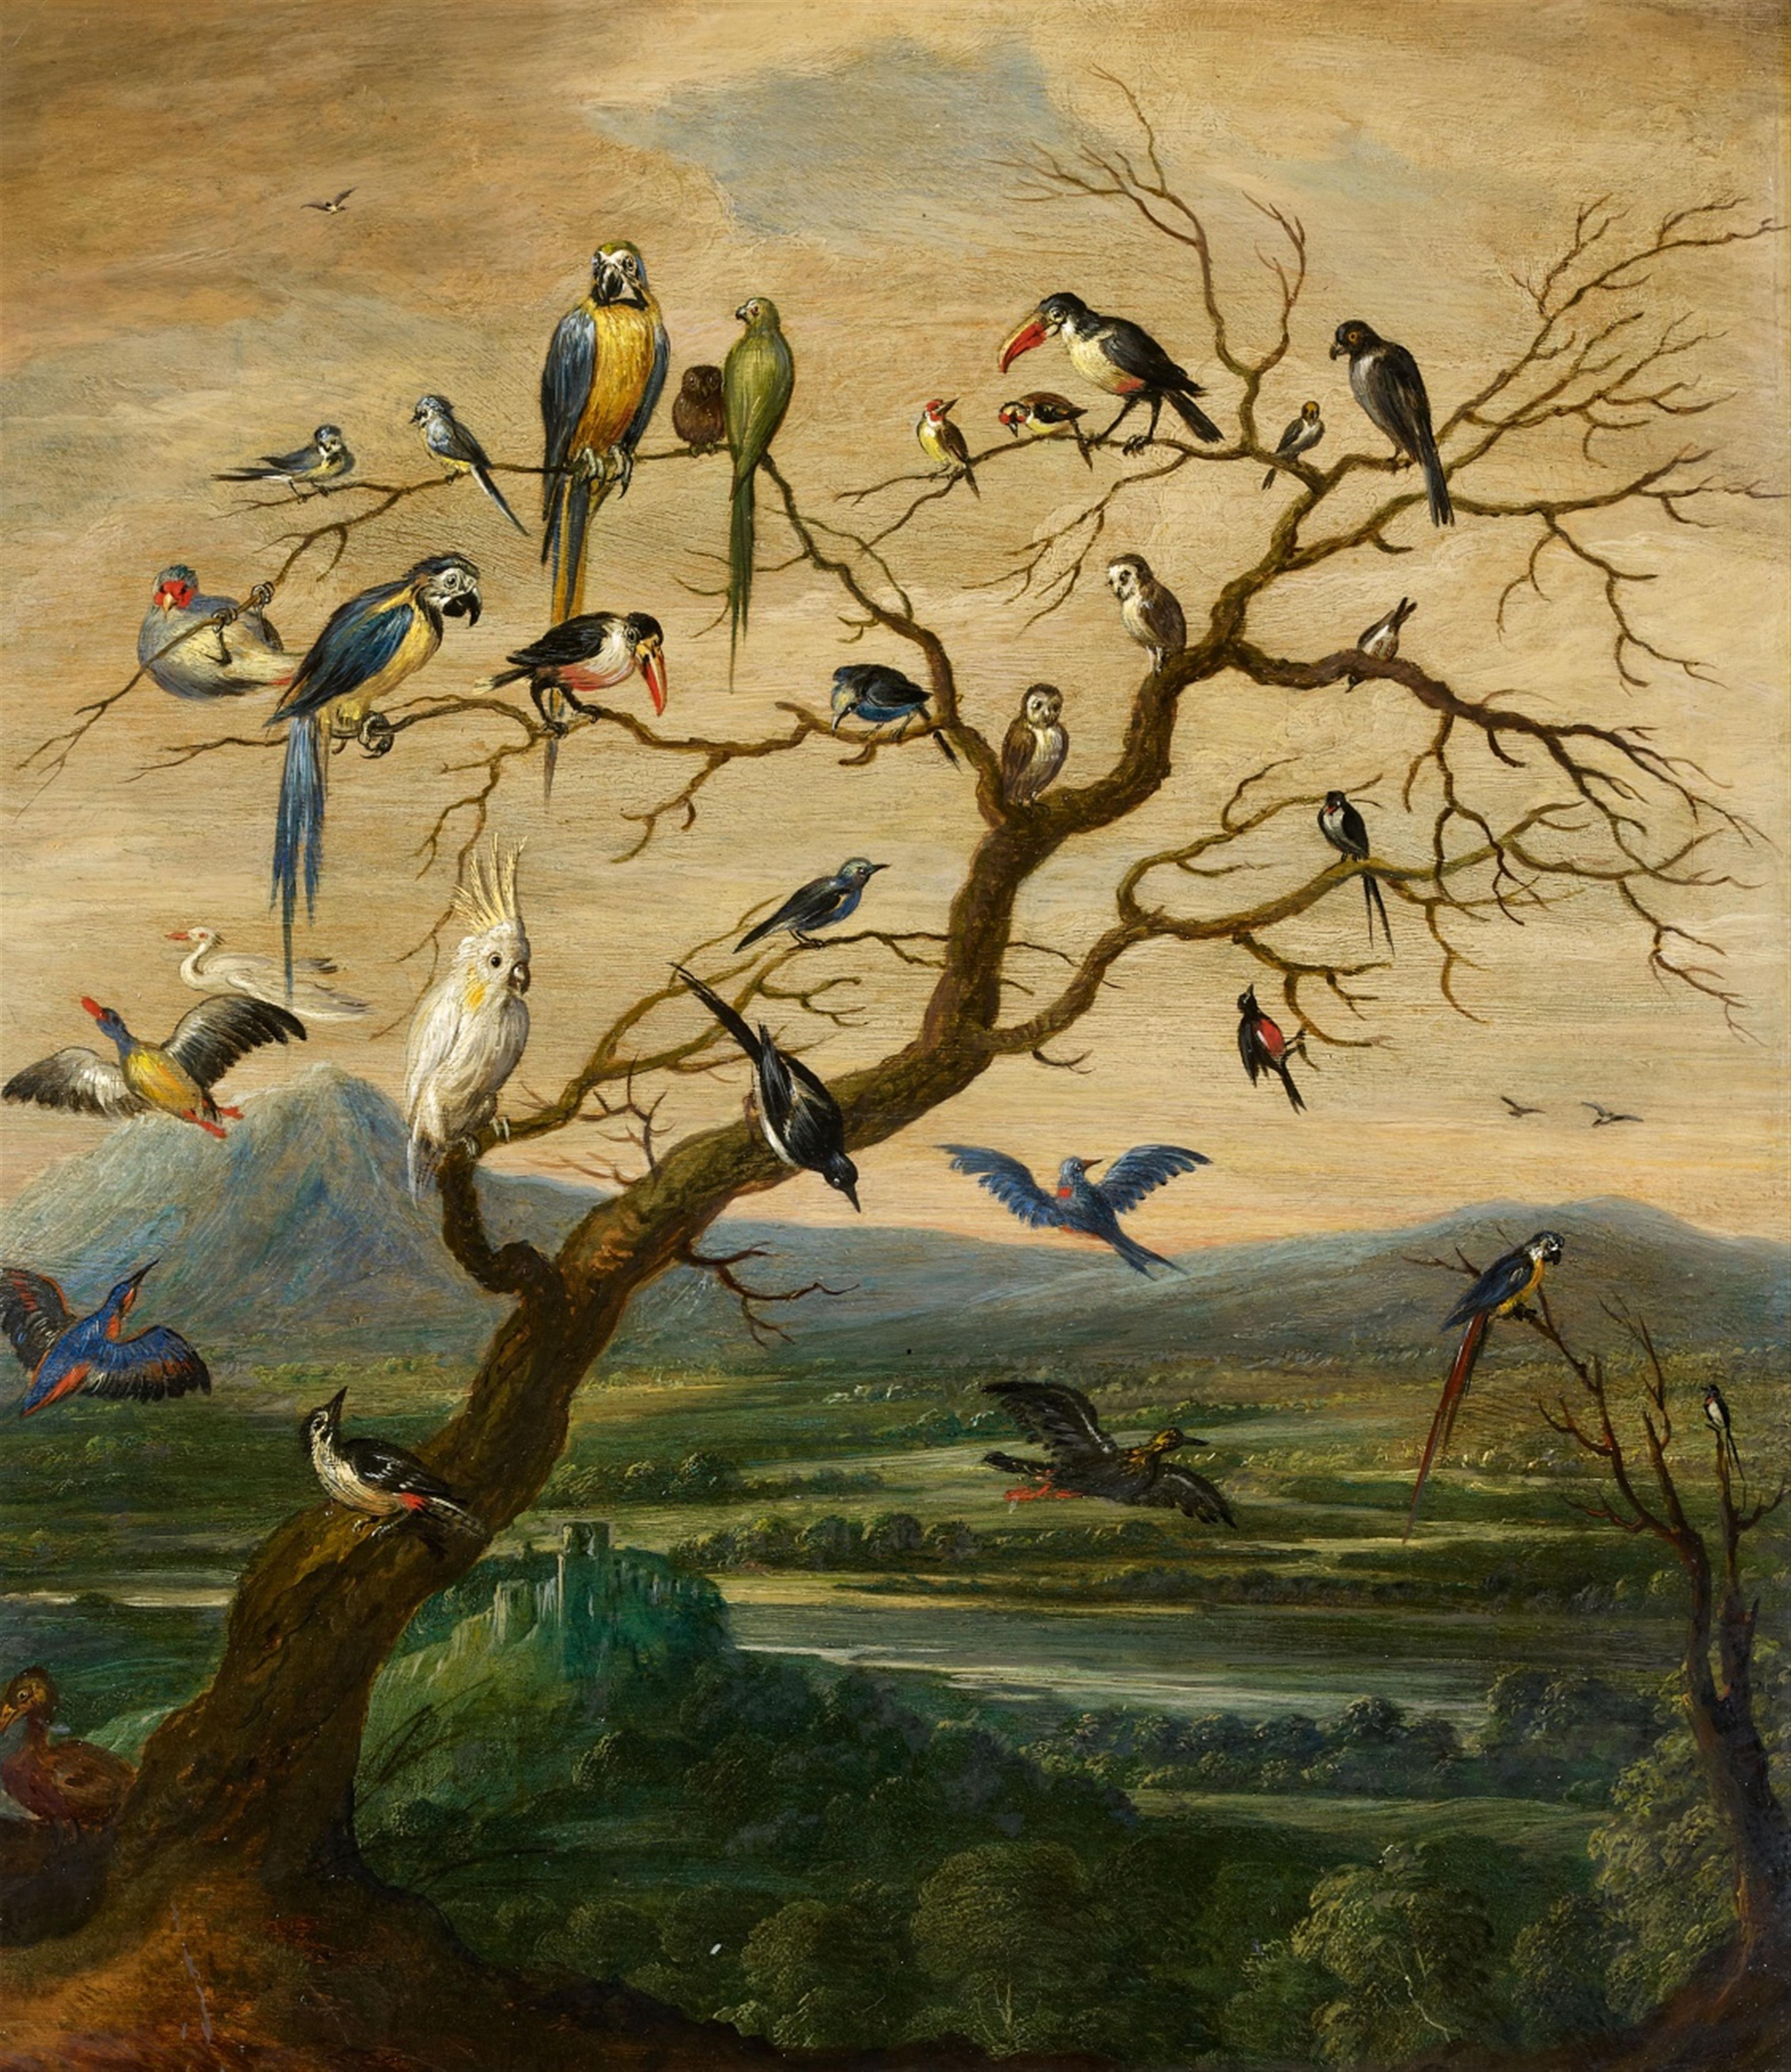 Flemish School, 17th century - Birds in a Tree before a Landscape - image-1